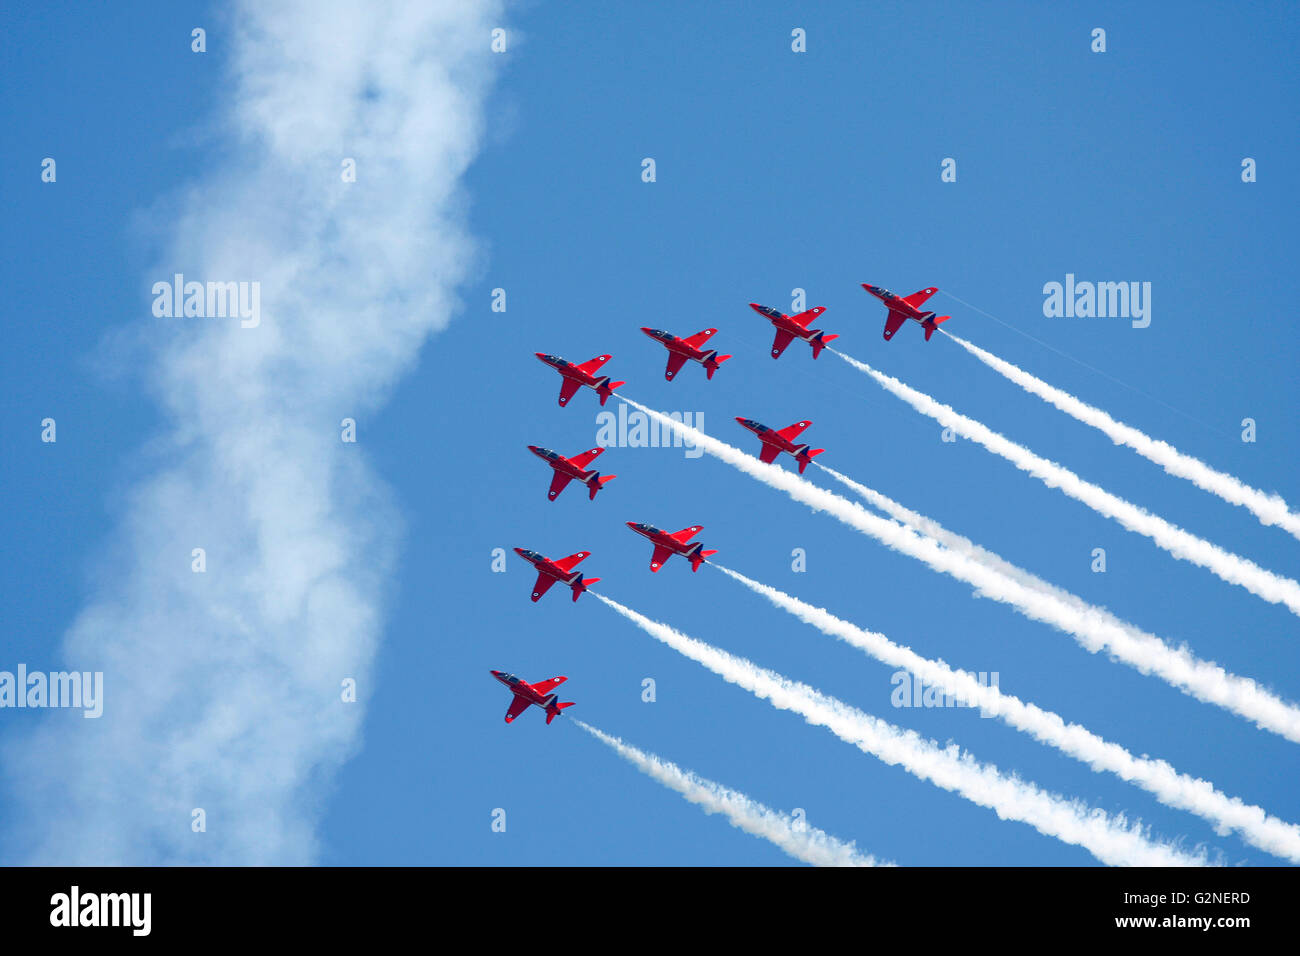 The Red Arrows formation flying against a blue sky Stock Photo